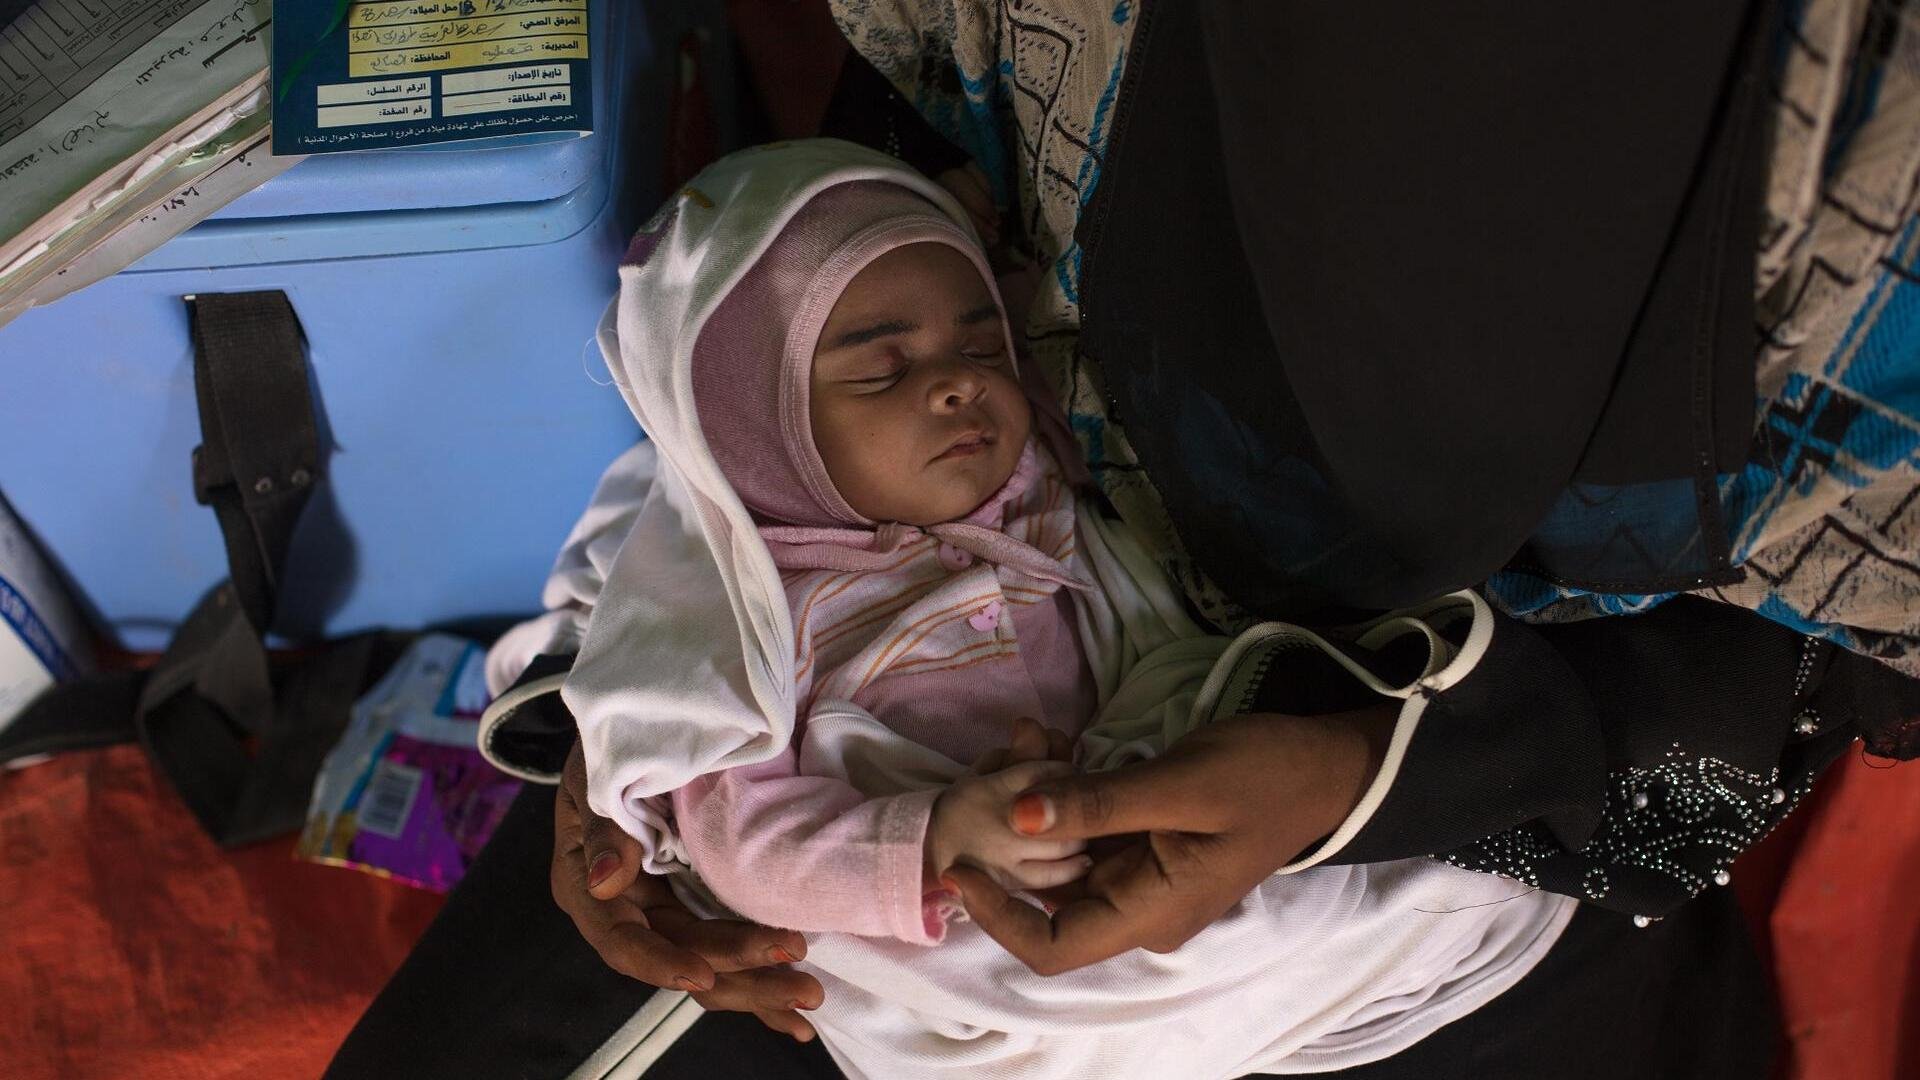 Baby Enqath, or "Rescue," sleeps in her mother's arms